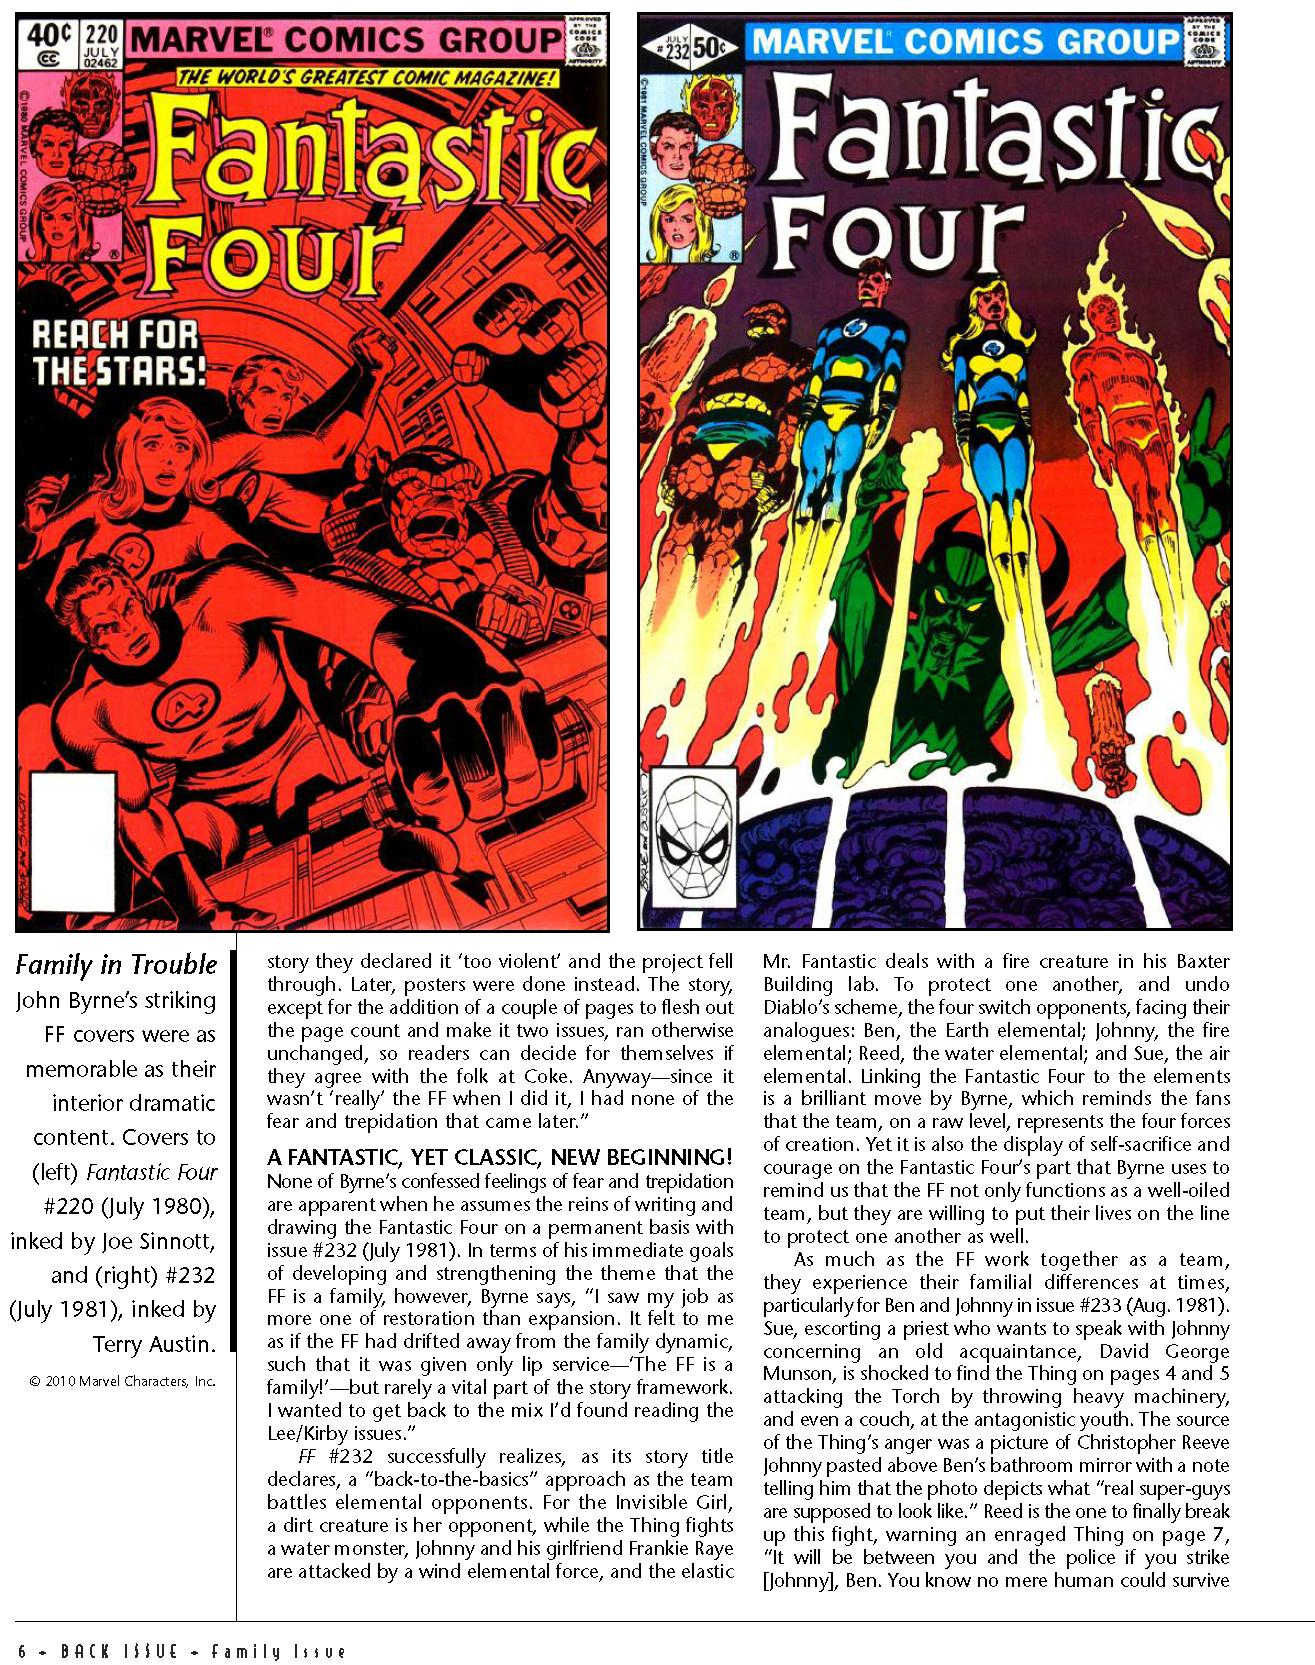 Read online Back Issue comic -  Issue #38 - 8